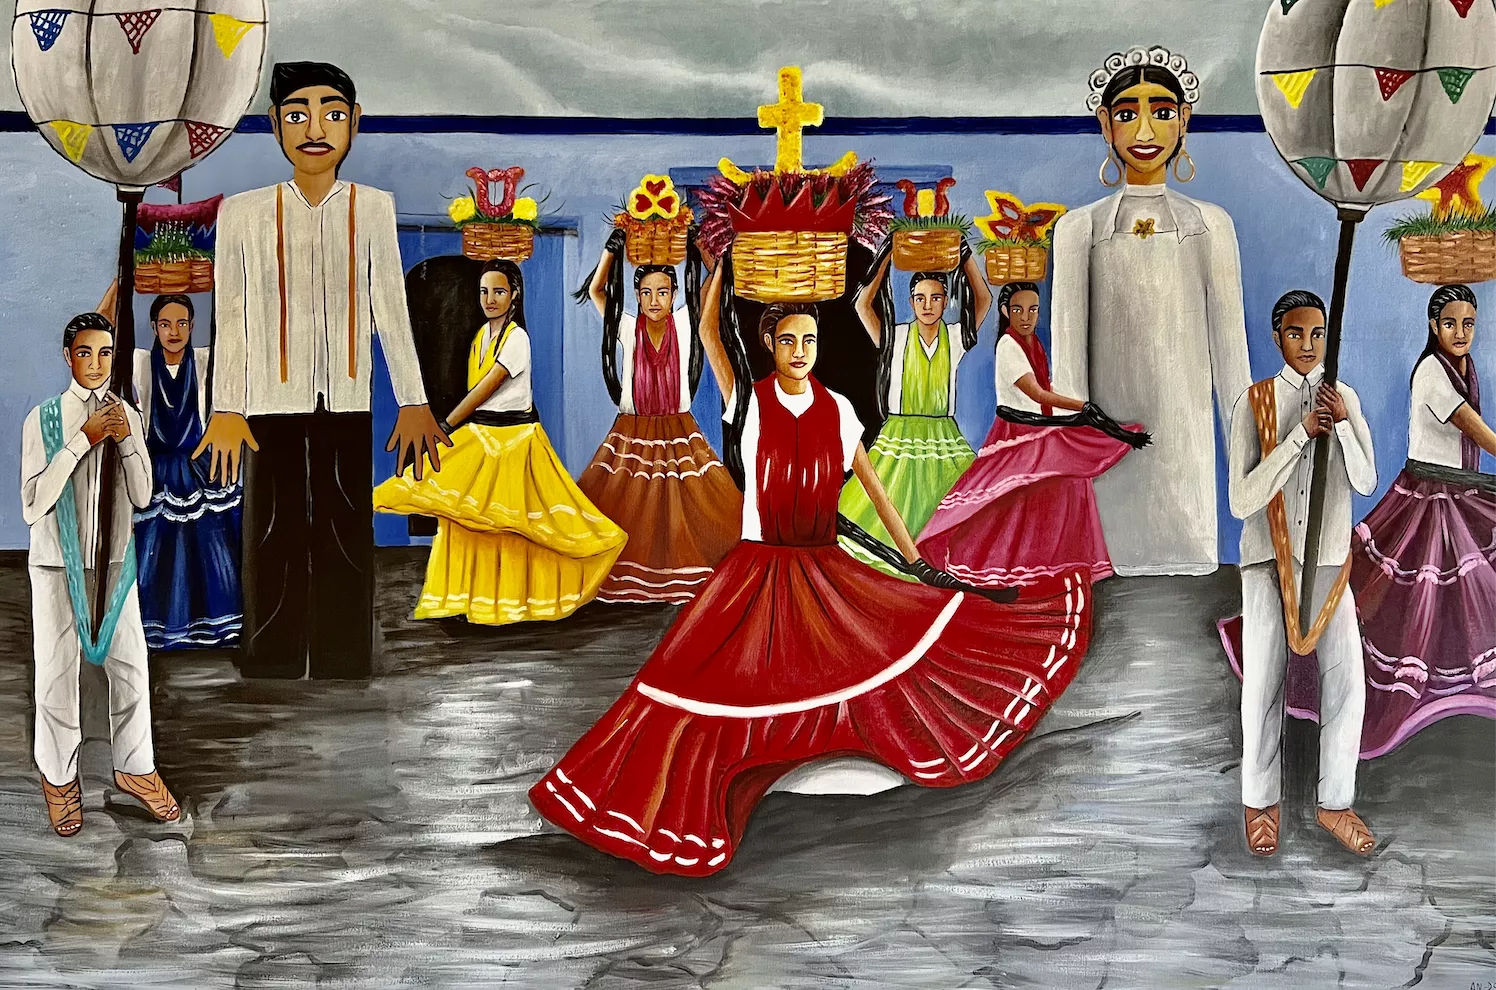 Angel Pacheco Soriano Calinda Oaxaquena (Oaxacan Folk Dance), 2022  Oils on canvas  The piece depicts the traditions and culture of Oaxaca, Mexico. Women dance in formation with baskets on their heads. Men hold paper lanterns. Giant paperpermachie puppets in the shape of a man and a woman are upright amongst the dancers.Oils on canvas